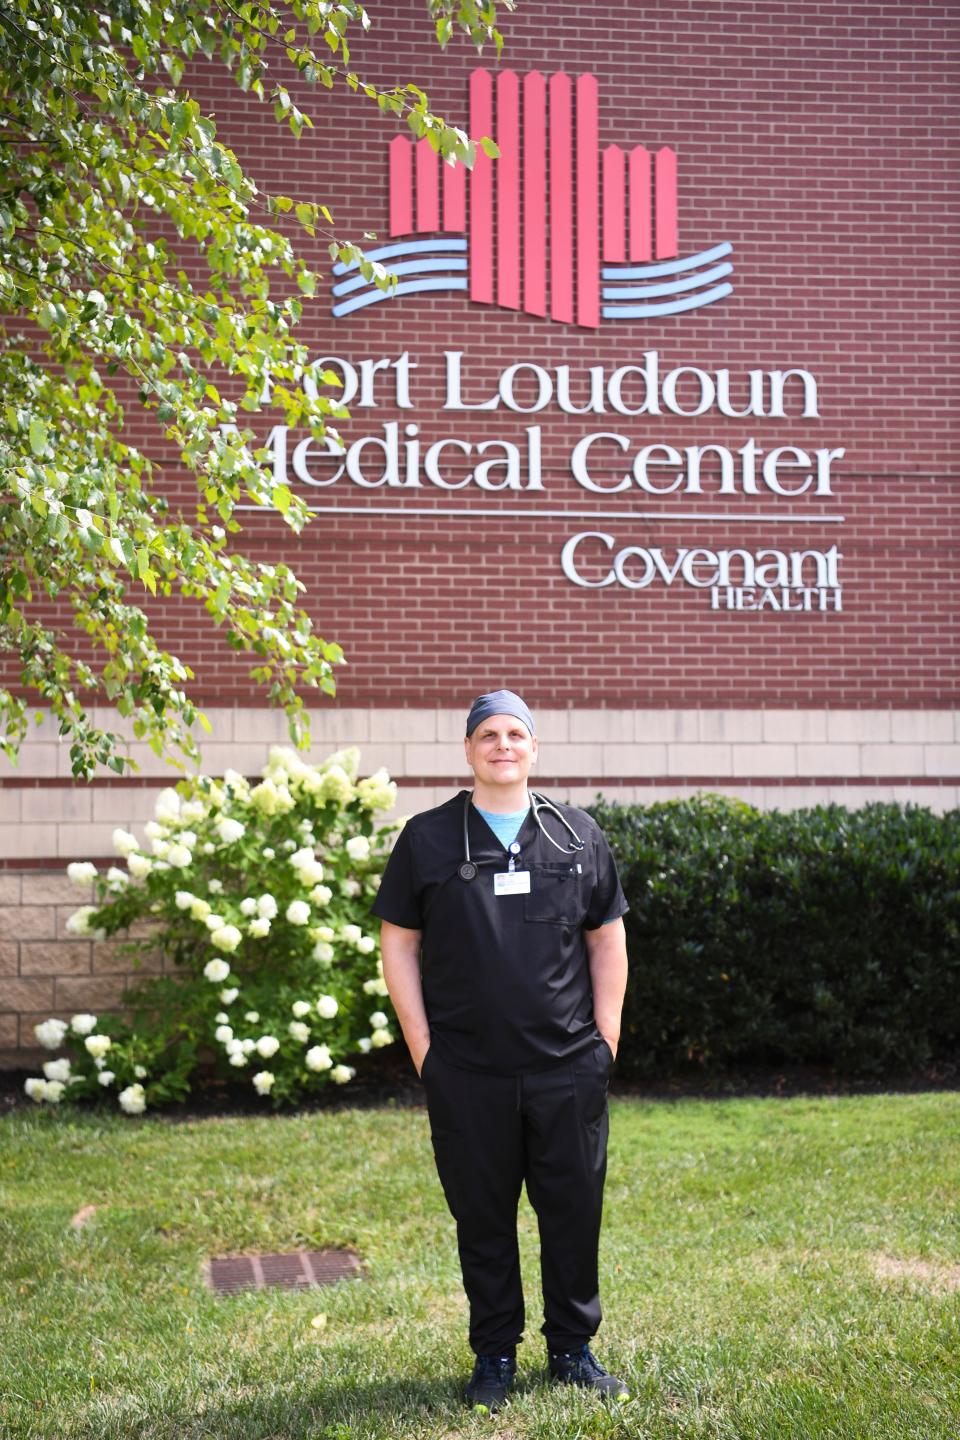 Emergency Department Director of Fort Loudoun Medical Center Dr. Erik Geibig poses for a photo outside the hospital, Friday, July 22, 2022.